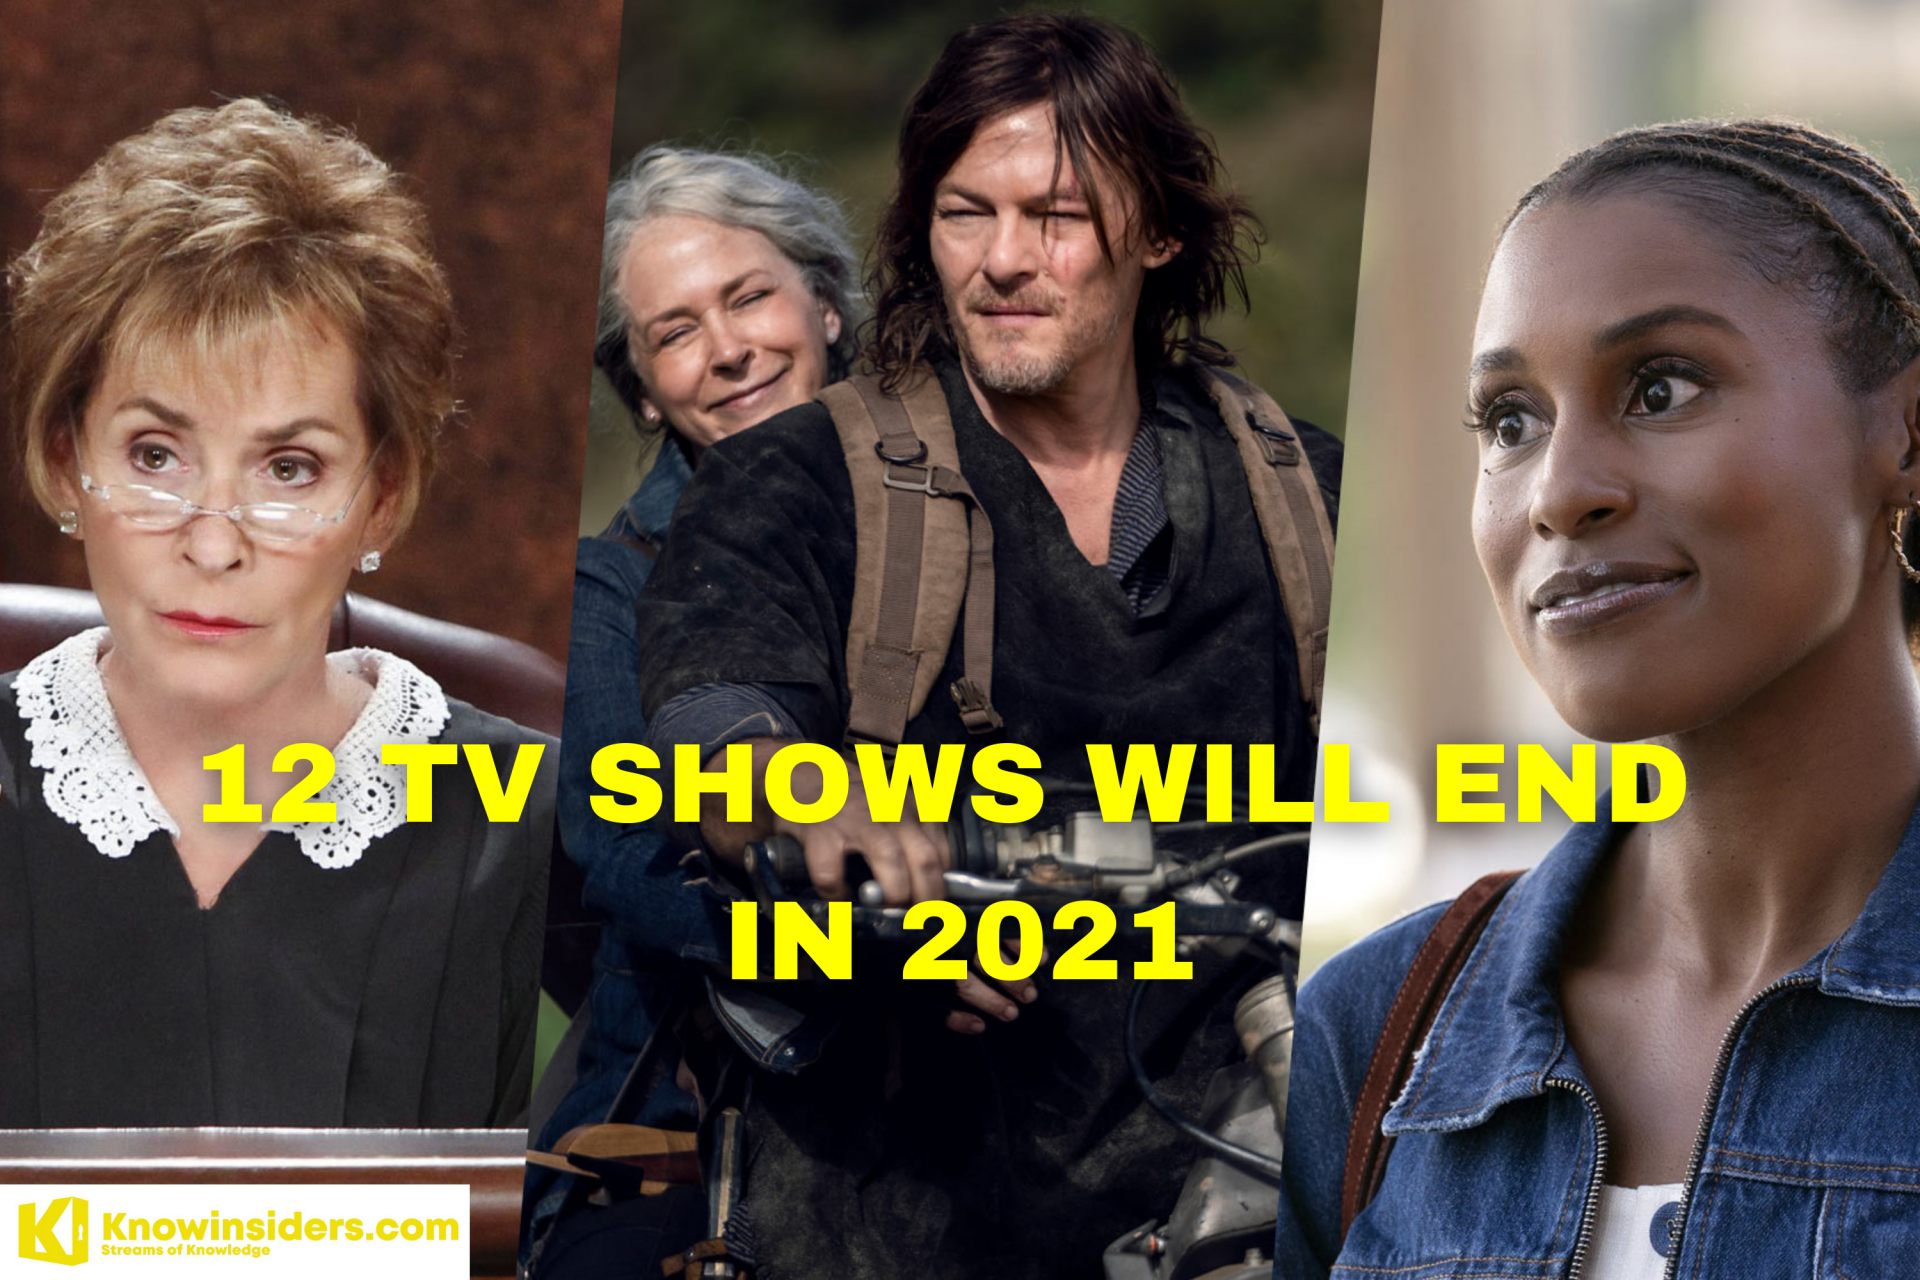 12 Big TV Shows on Netflix, Amazon, CBS Cancelled or Ending in 2021